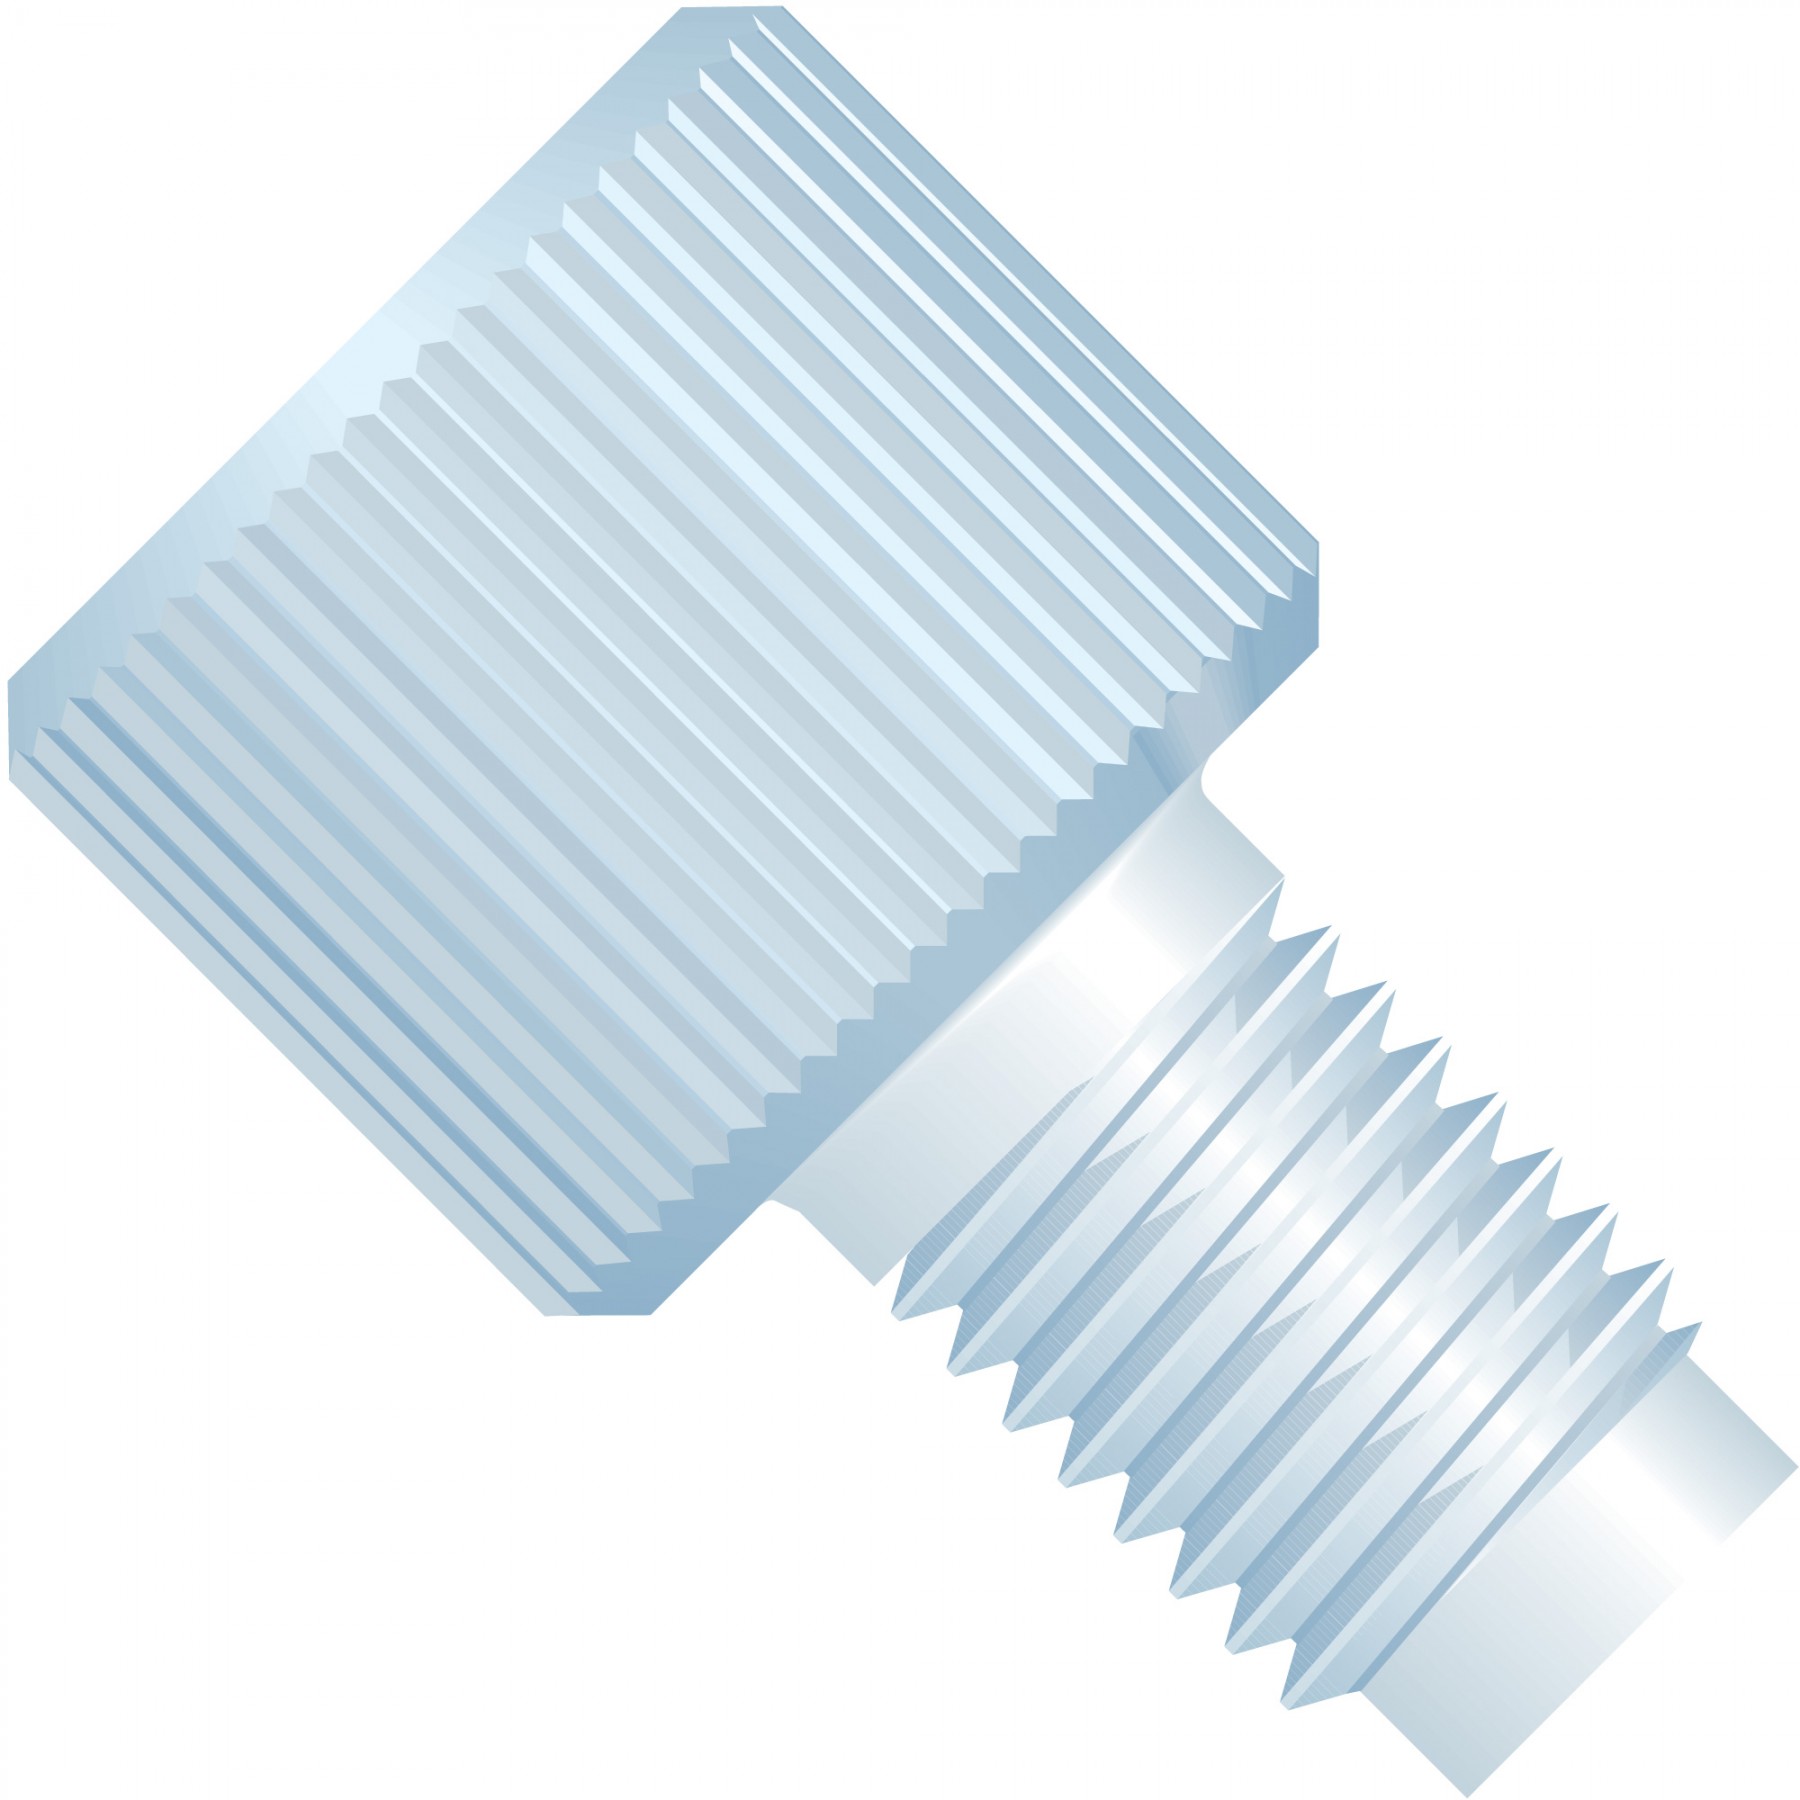 Adapters & Connectors: Threaded Adapter, M6 Flat Bottom (Female) to 1/4"-28 Flat Bottom (Male), PCTFE